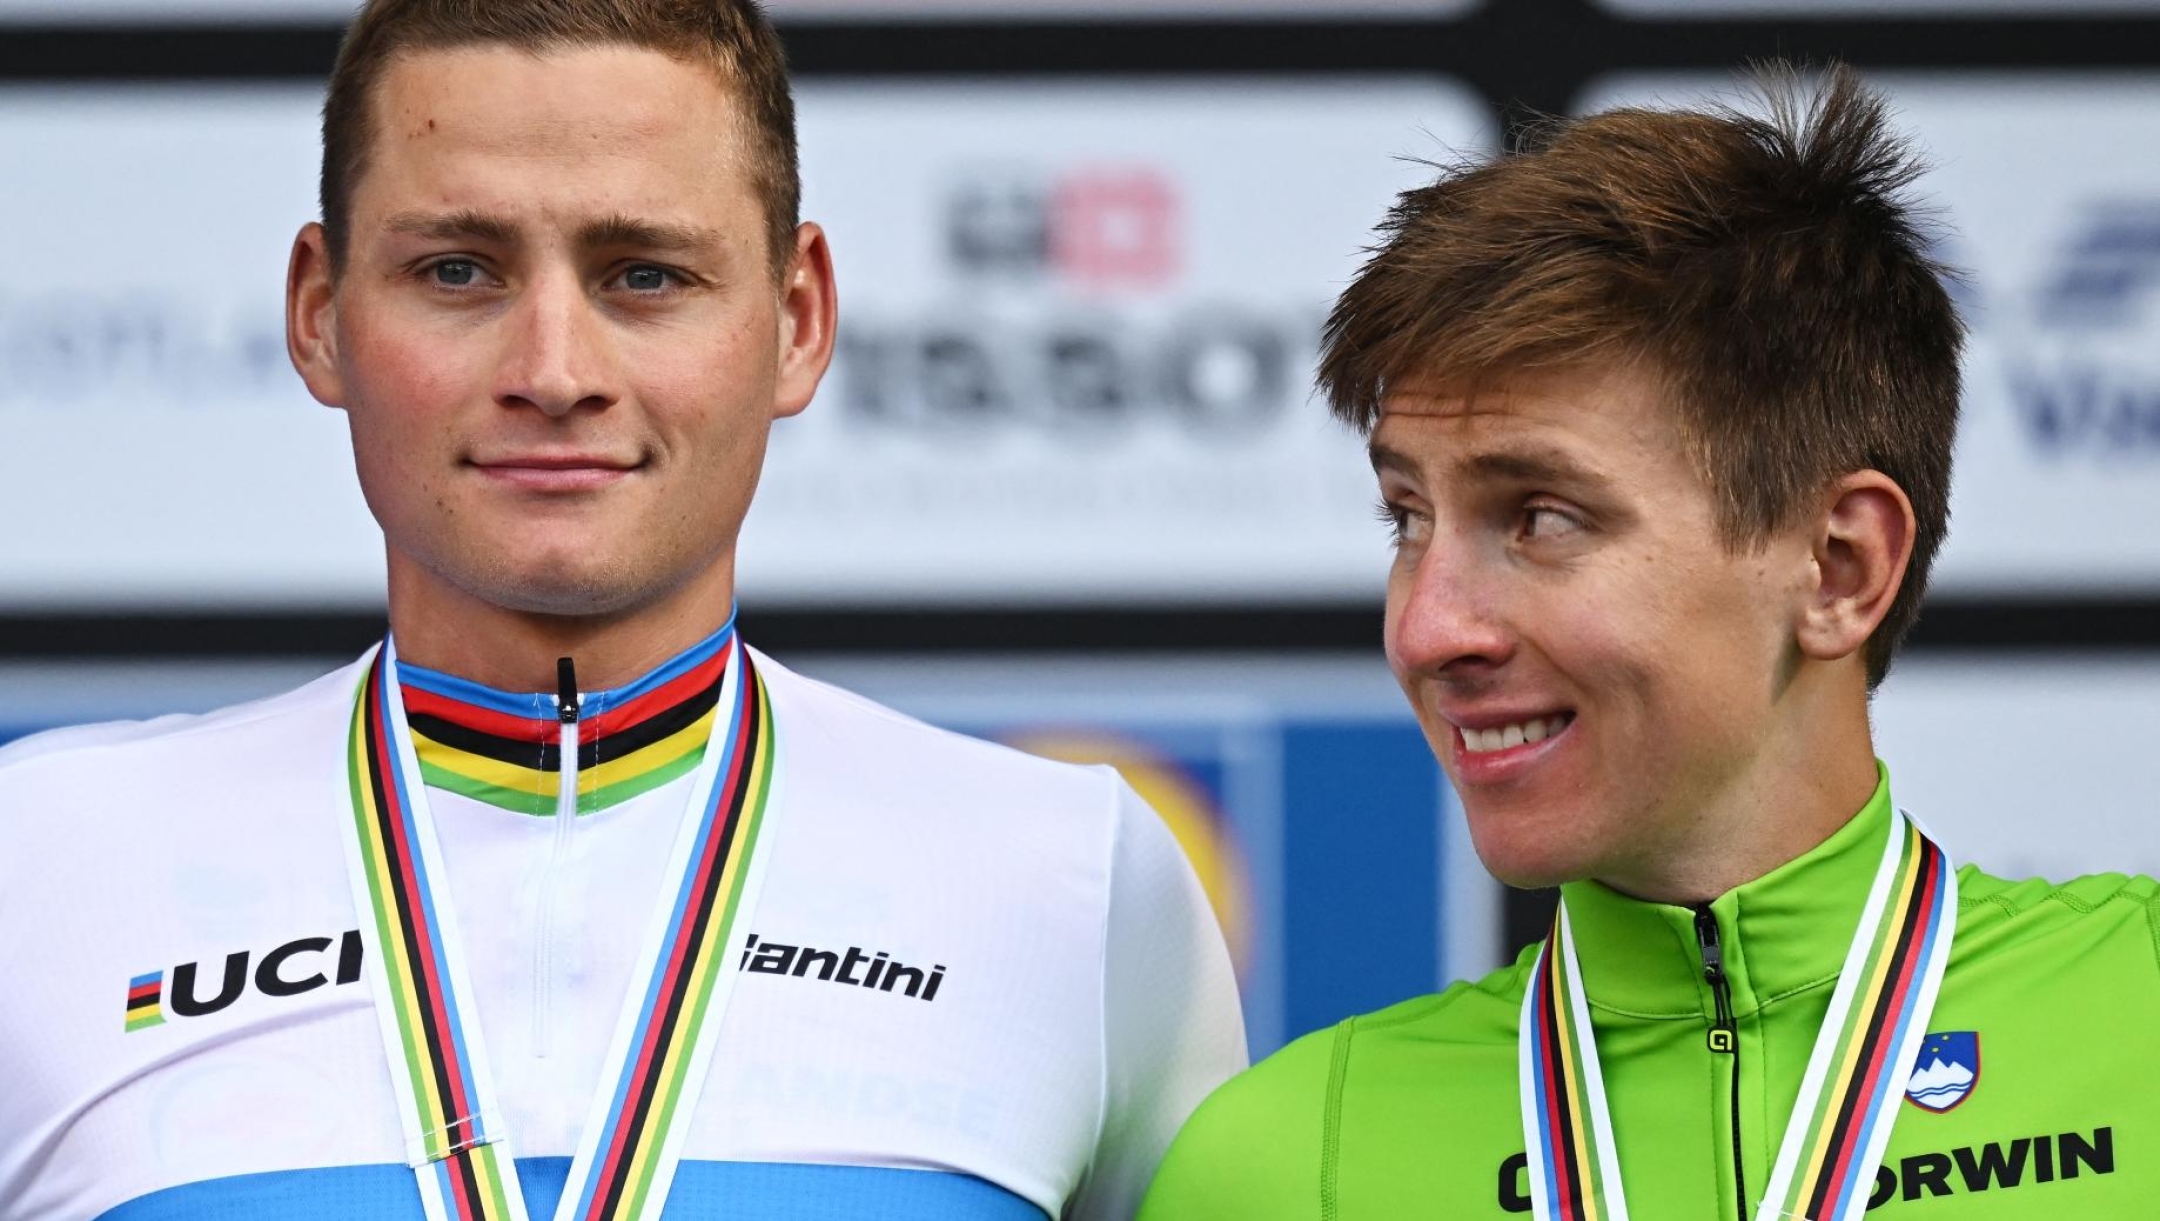 Netherland's Mathieu van der Poel (C), Belgium's Wout van Aert (L) and Slovenia's Tadej Pogacar stand on the podium after the men's Elite Road Race at the Cycling World Championships in Edinburgh, Scotland on August 6, 2023. men's Elite Road Race at the Cycling World Championships in Edinburgh, Scotland on August 6, 2023. Netherland's Mathieu van der Poel took first place in the race that began in Scotland's capital city, Edinburgh, and ended with a street circuit in Glasgow. Belgium's Wout van Aert came second with Slovenia's Tadej Pogacar finishing in third place. (Photo by Oli SCARFF / AFP)